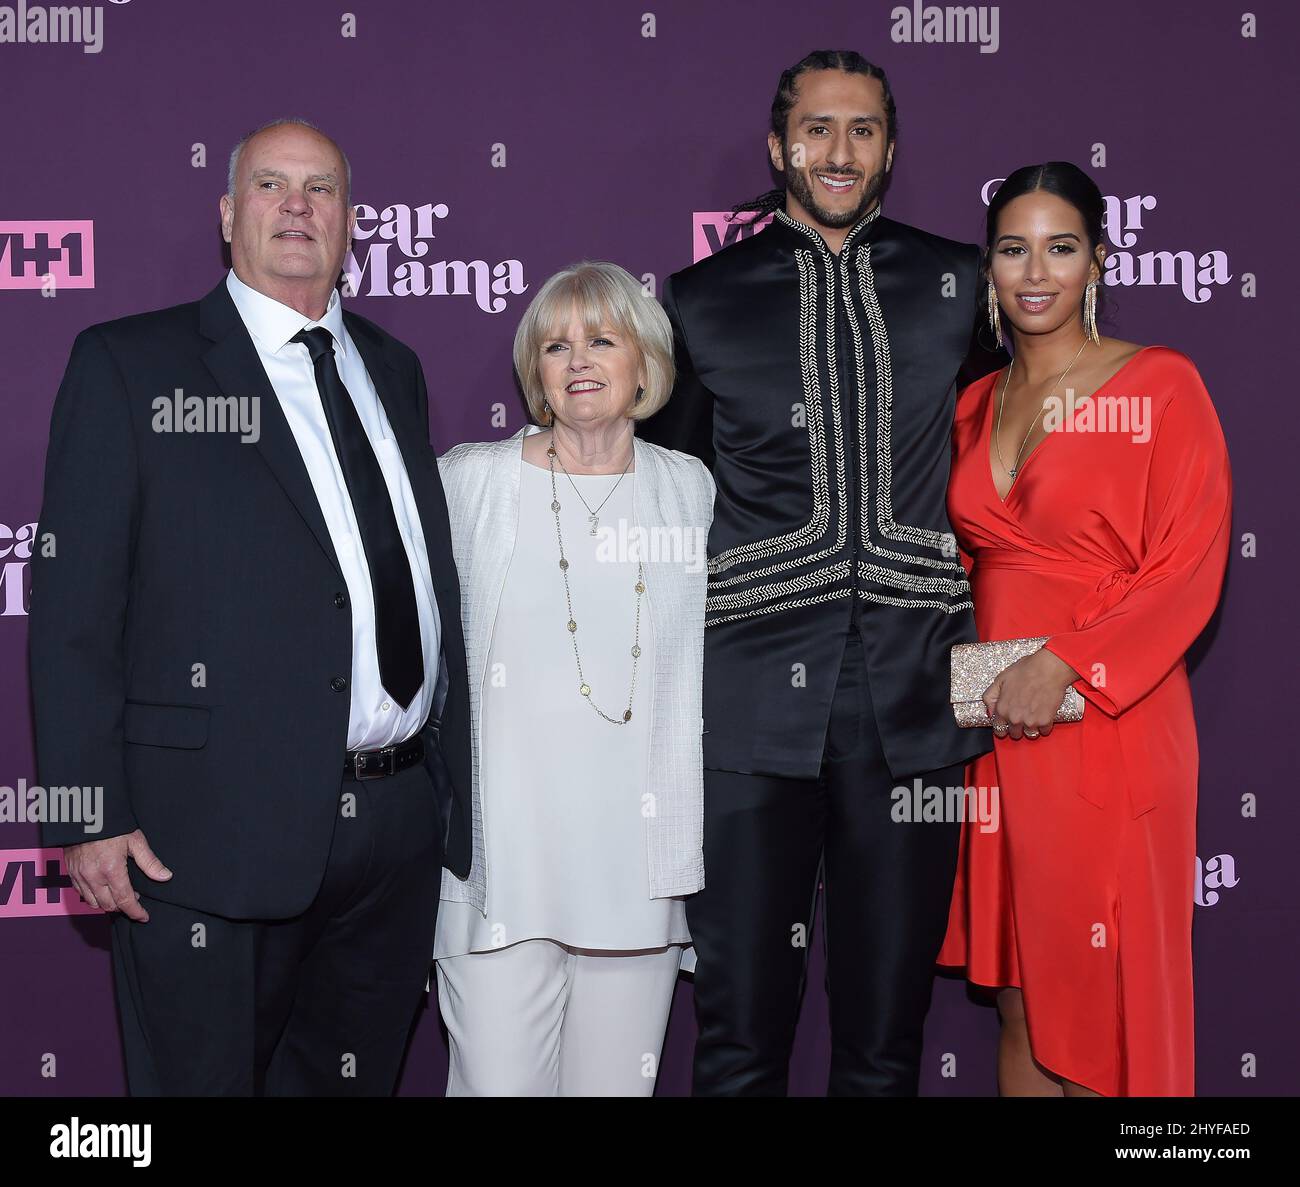 Colin Kaepernick, Teresa Kaepernick, Rick Kaepernick and Nessa Diab at VH1's 3rd Annual 'Dear Mama: A Love Letter to Moms'€ event at The Theatre at ACE Hotel on May 3, 2018 in Los Angeles, CA. Stock Photo